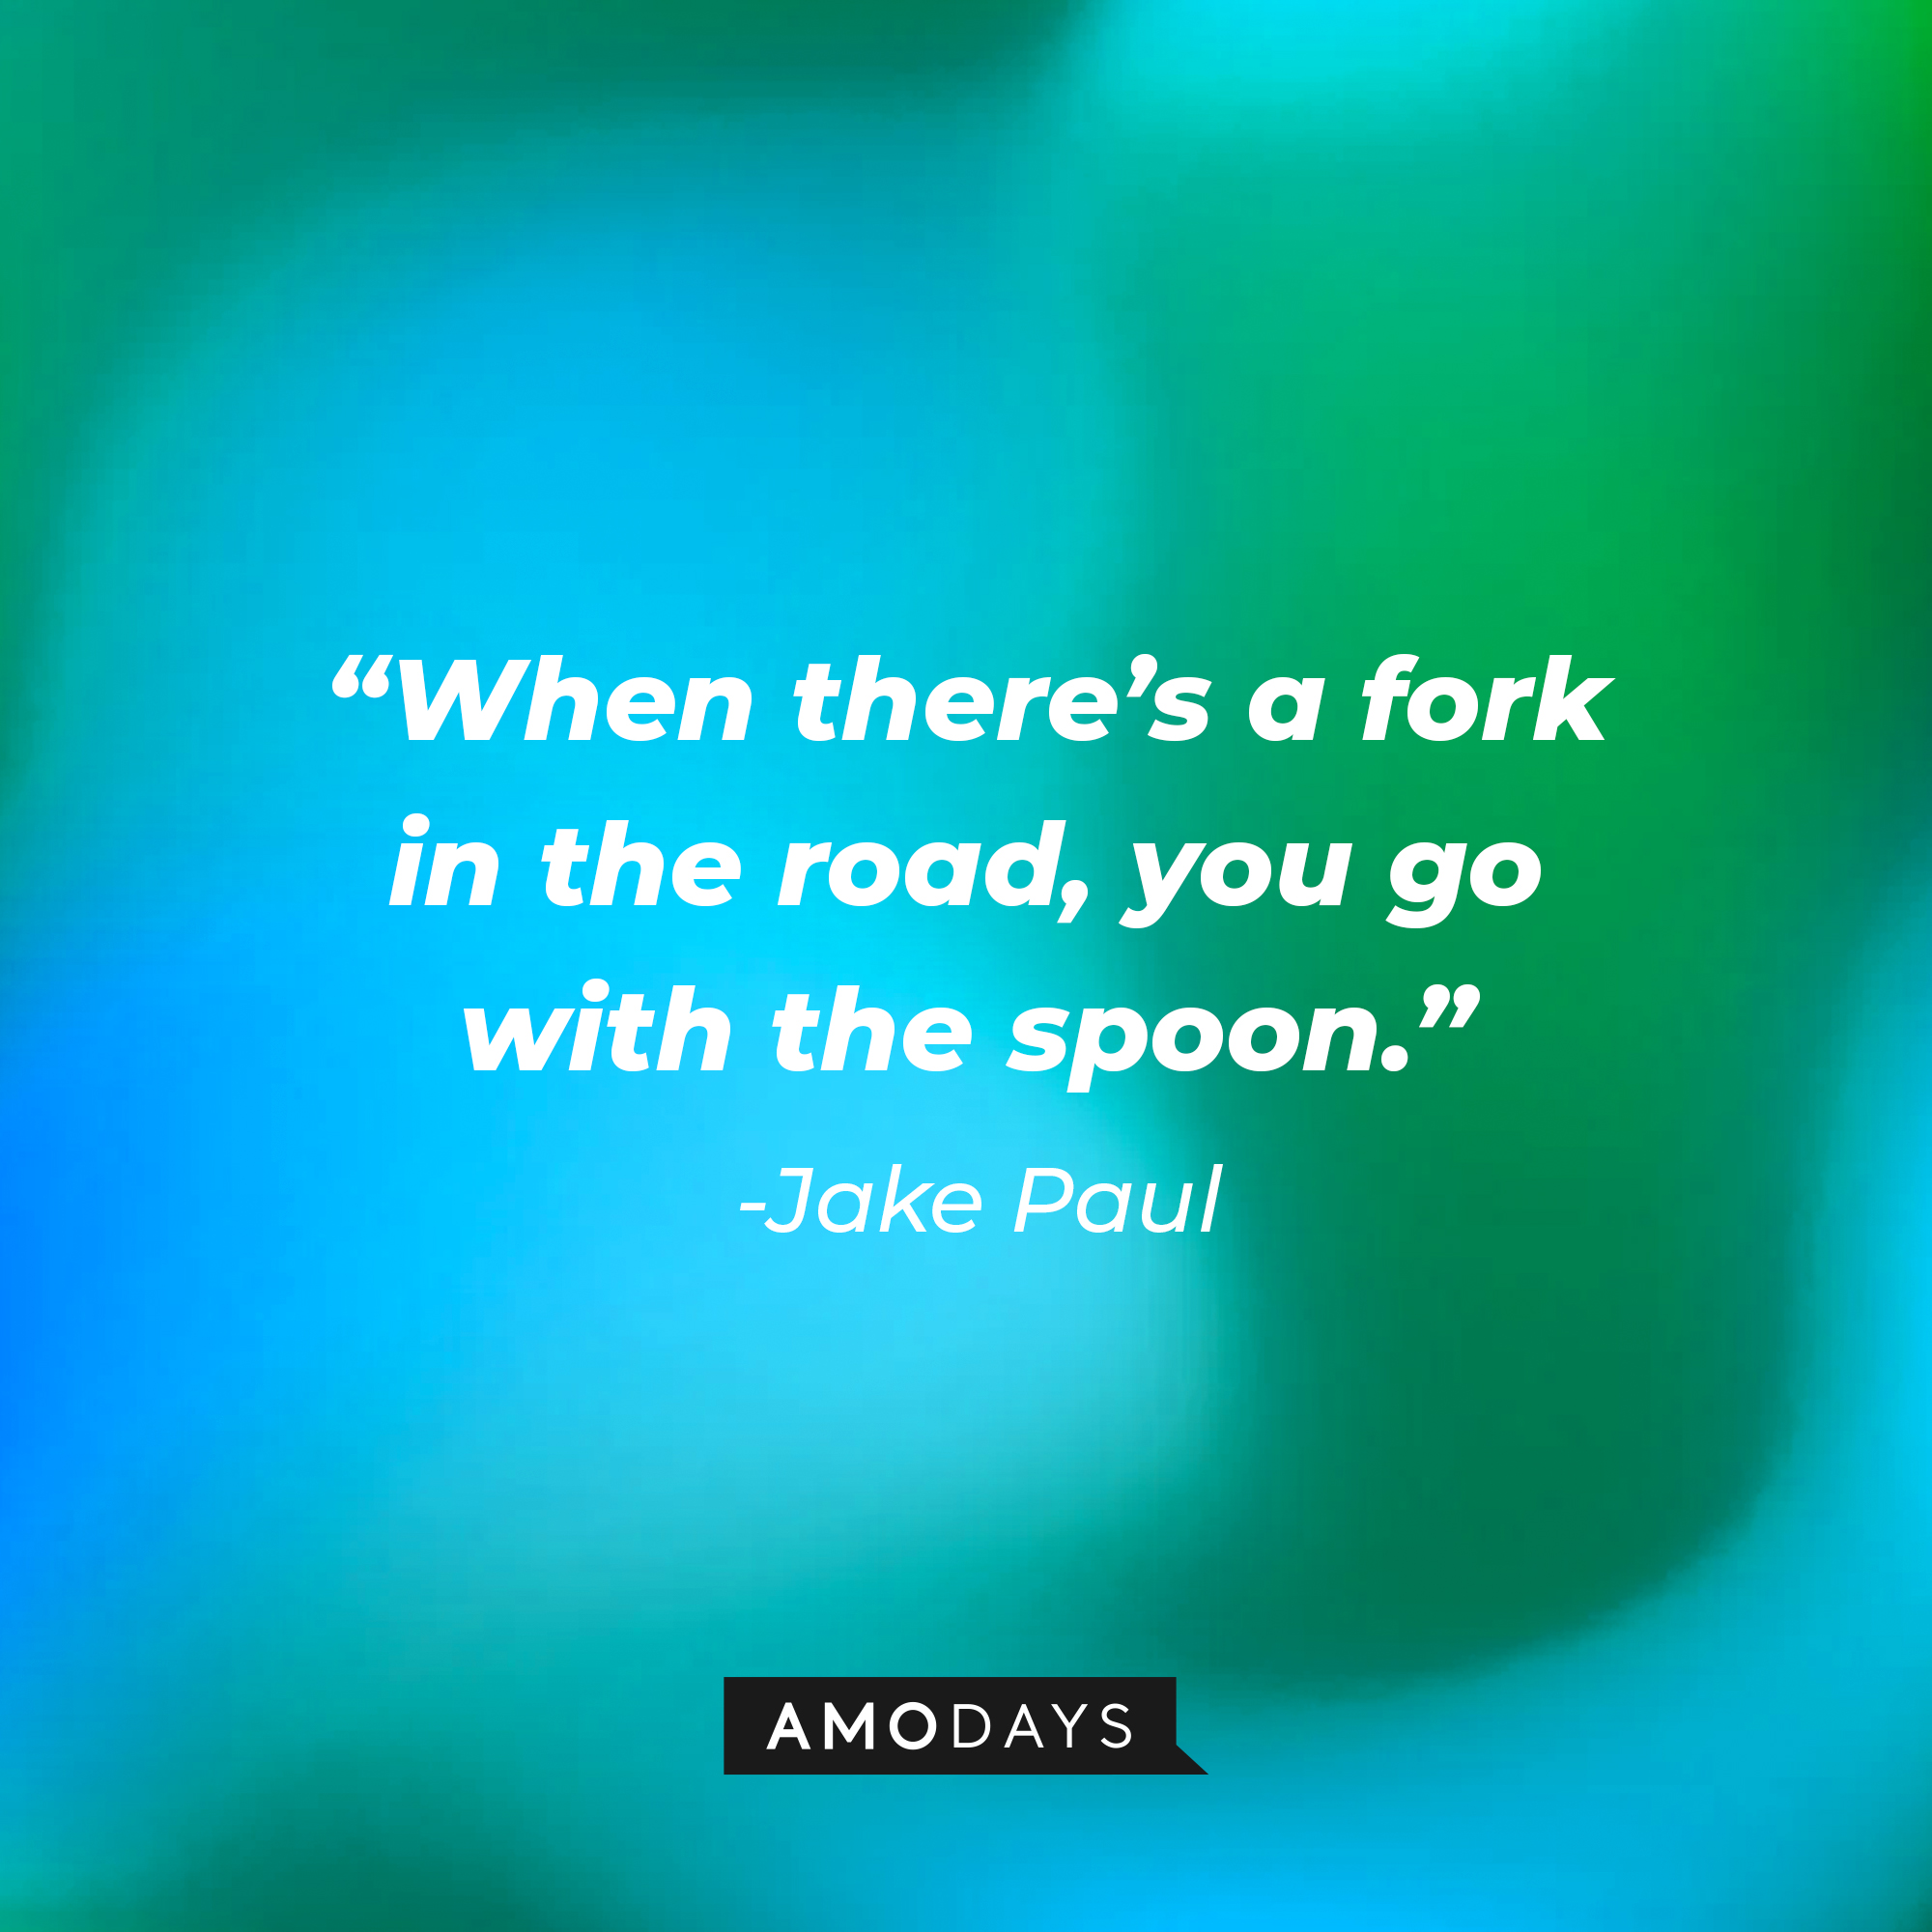 Jake Paul’s quote: "When there’s a fork in the road, you go with the spoon." | Image: Amodays